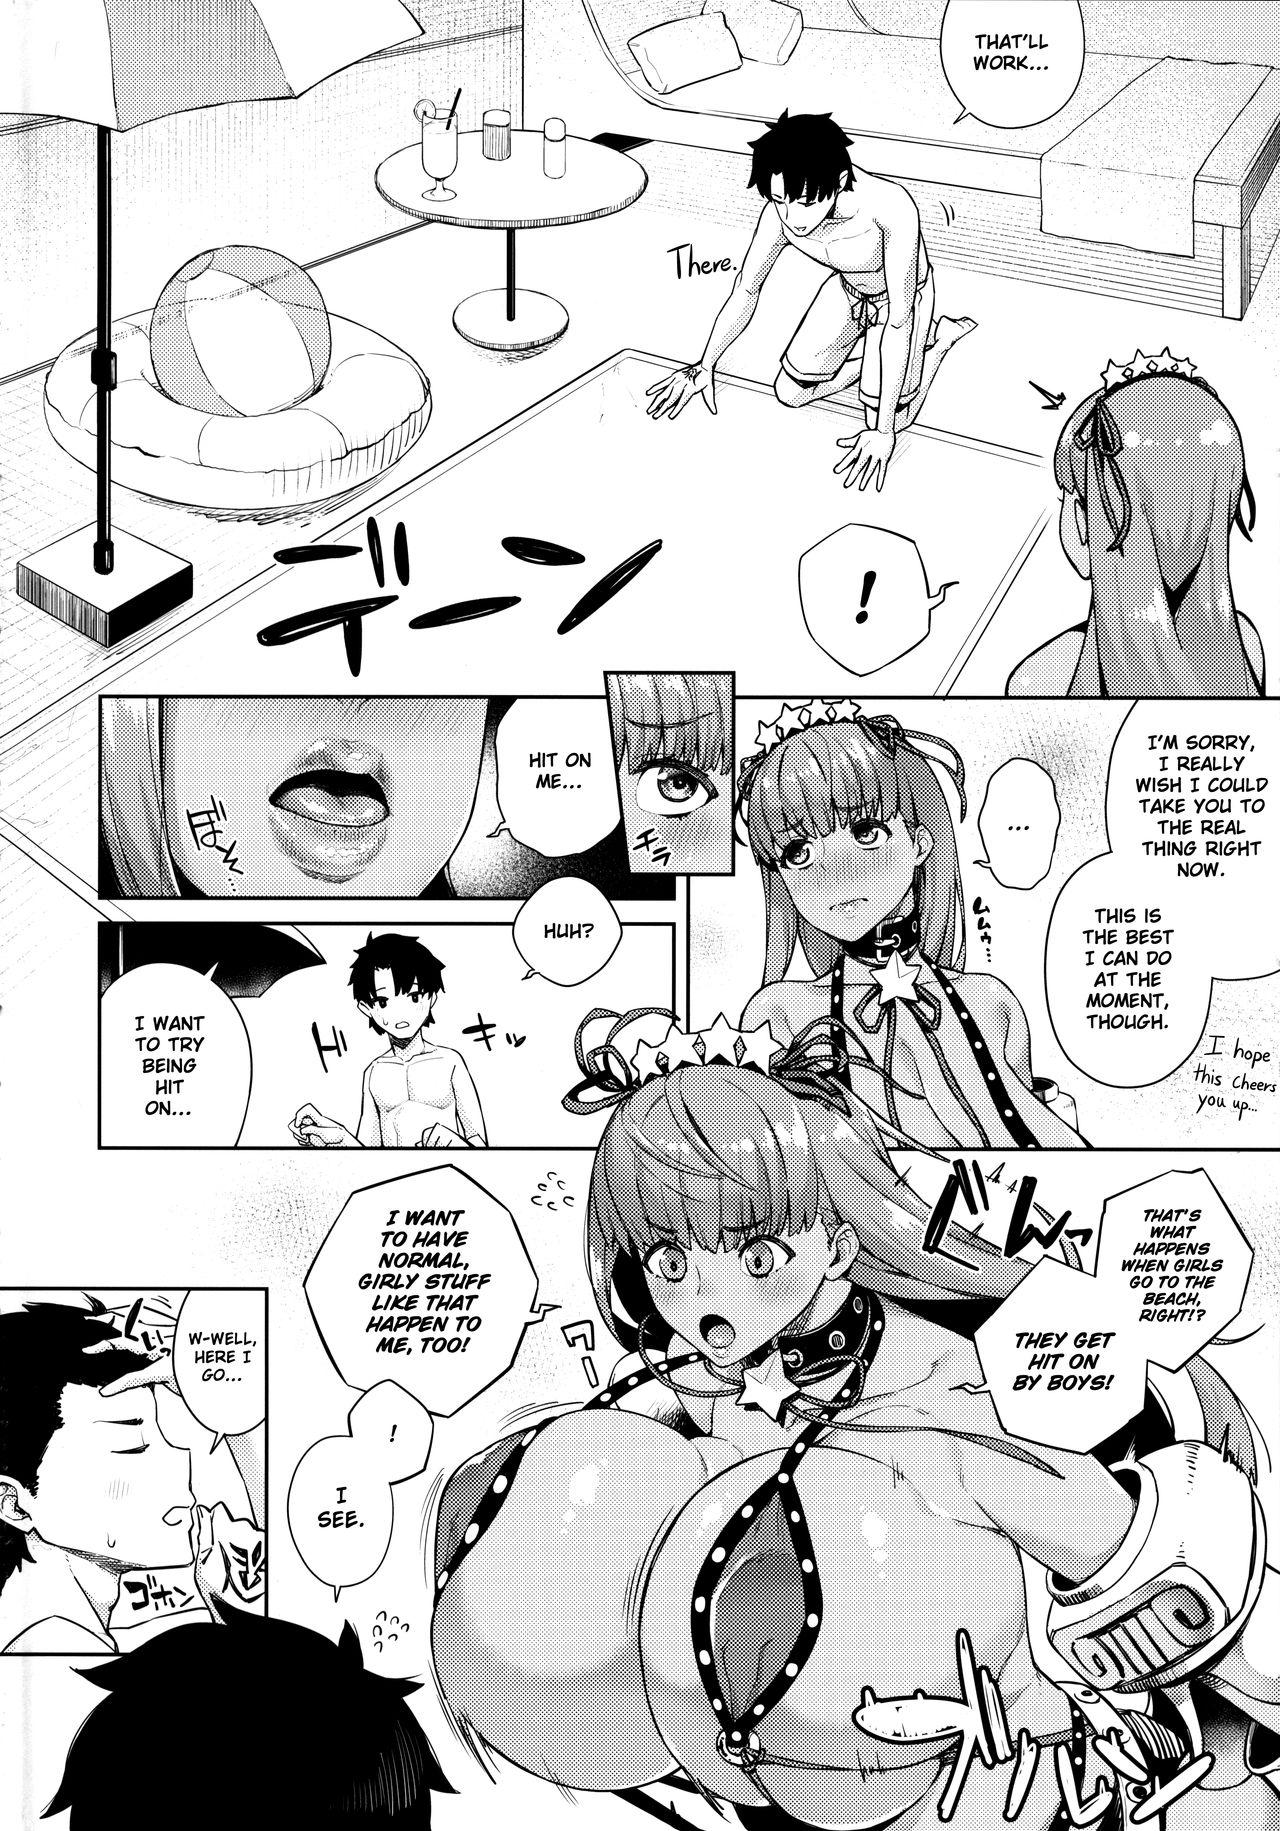 Hot Naked Women Kyokou no Umibe nite | at the fictional seaside - Fate grand order Alt - Page 4